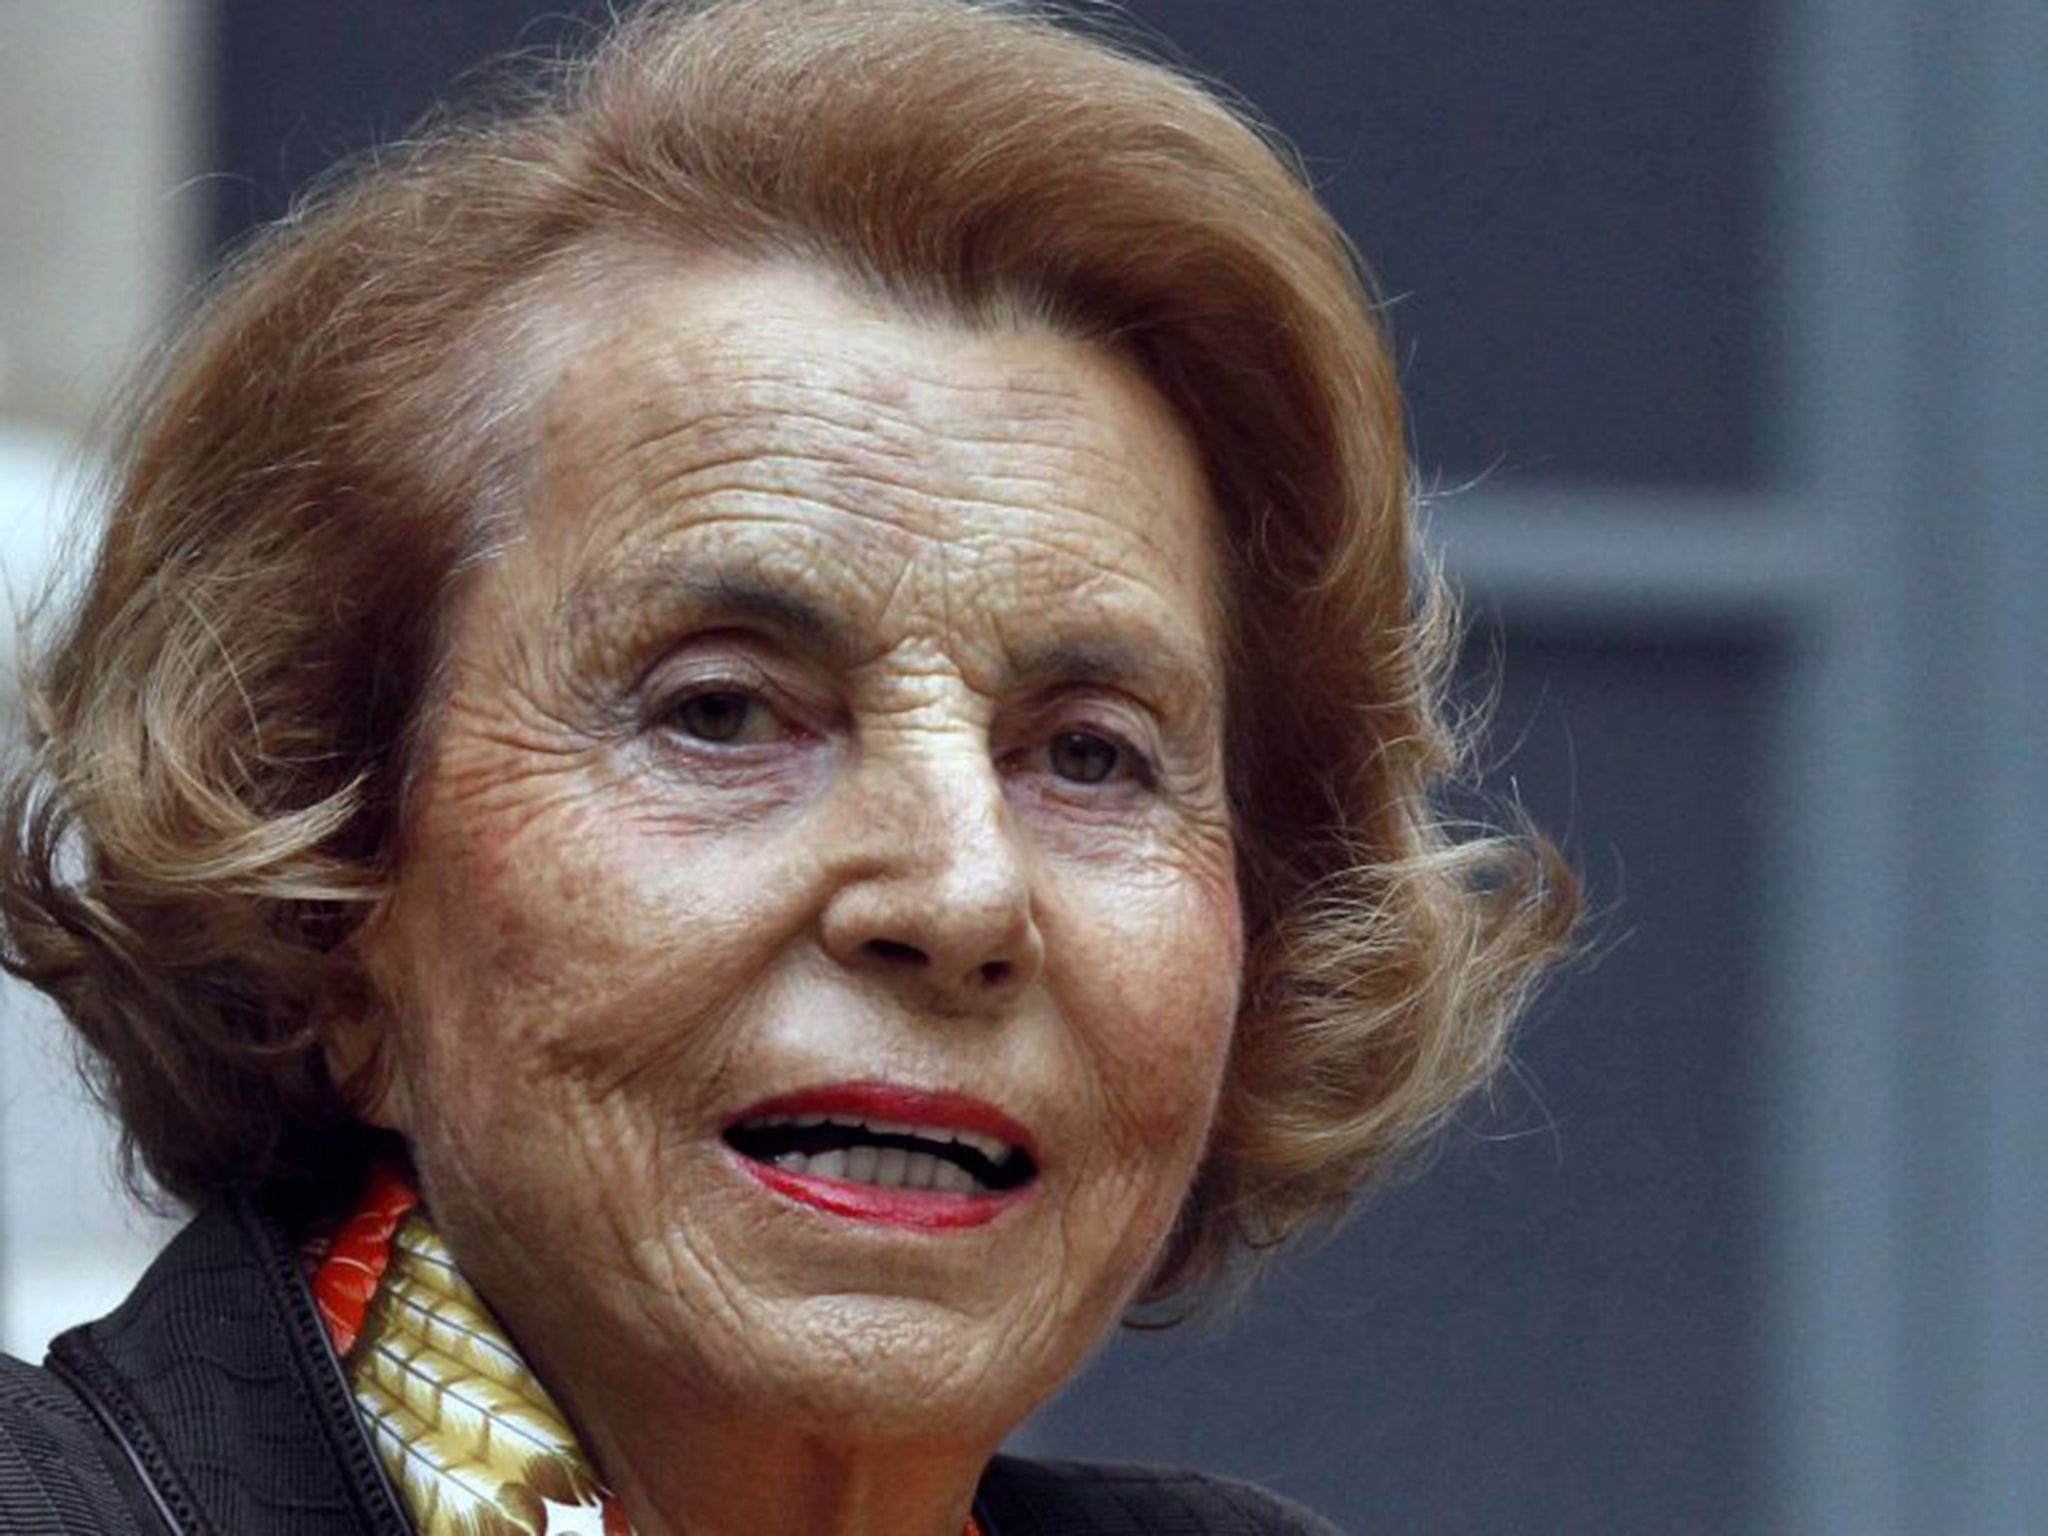 Liliane Bettencourt is the richest woman in the world